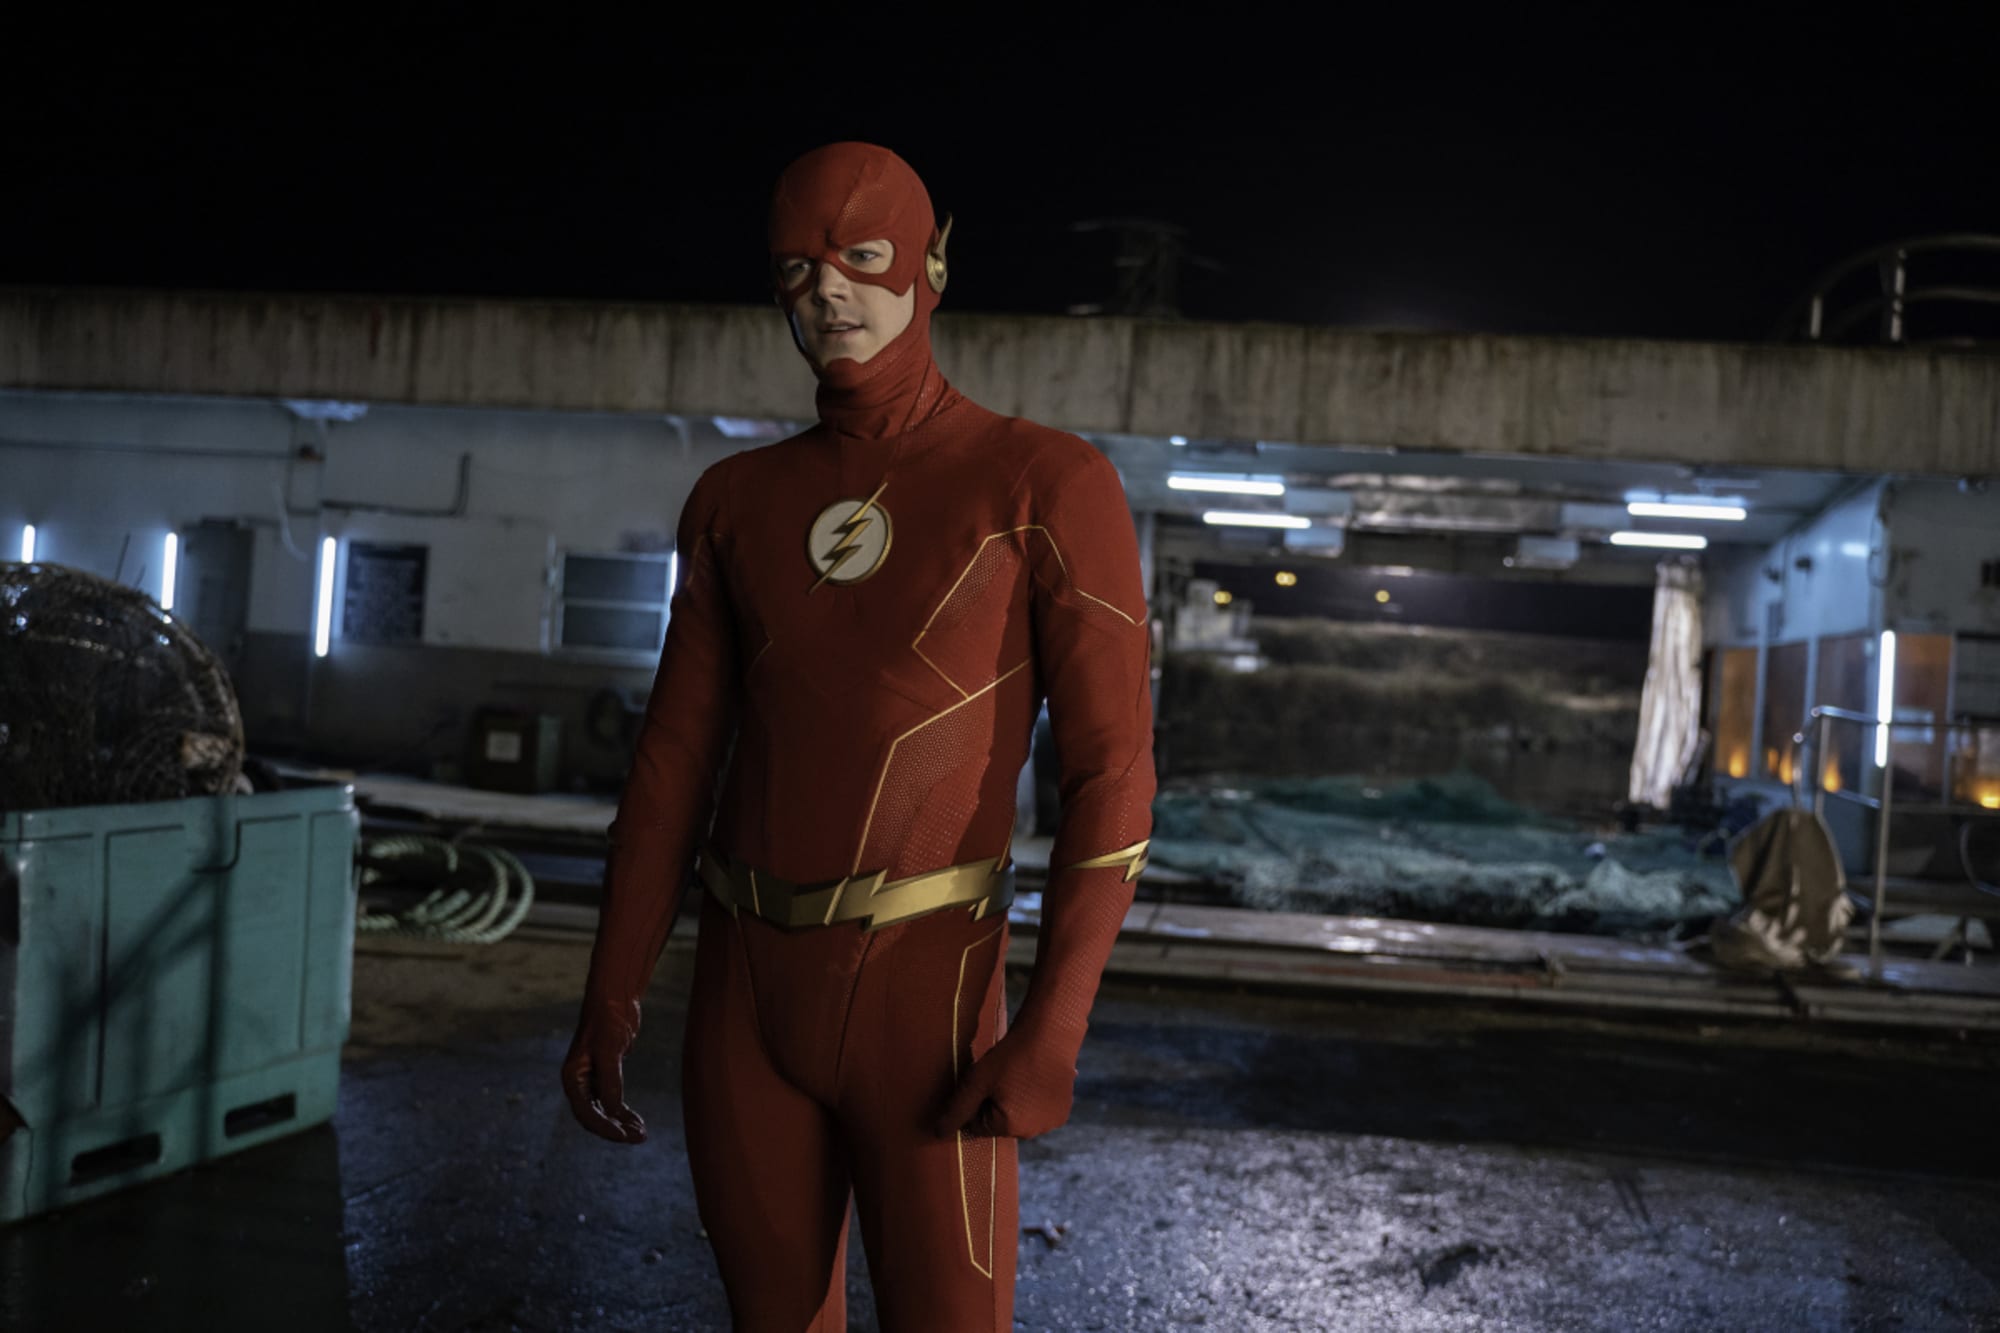 Hollywood Updates : The Flash Season 9 to Be Final, Arrowverse More or Less Coming to an End